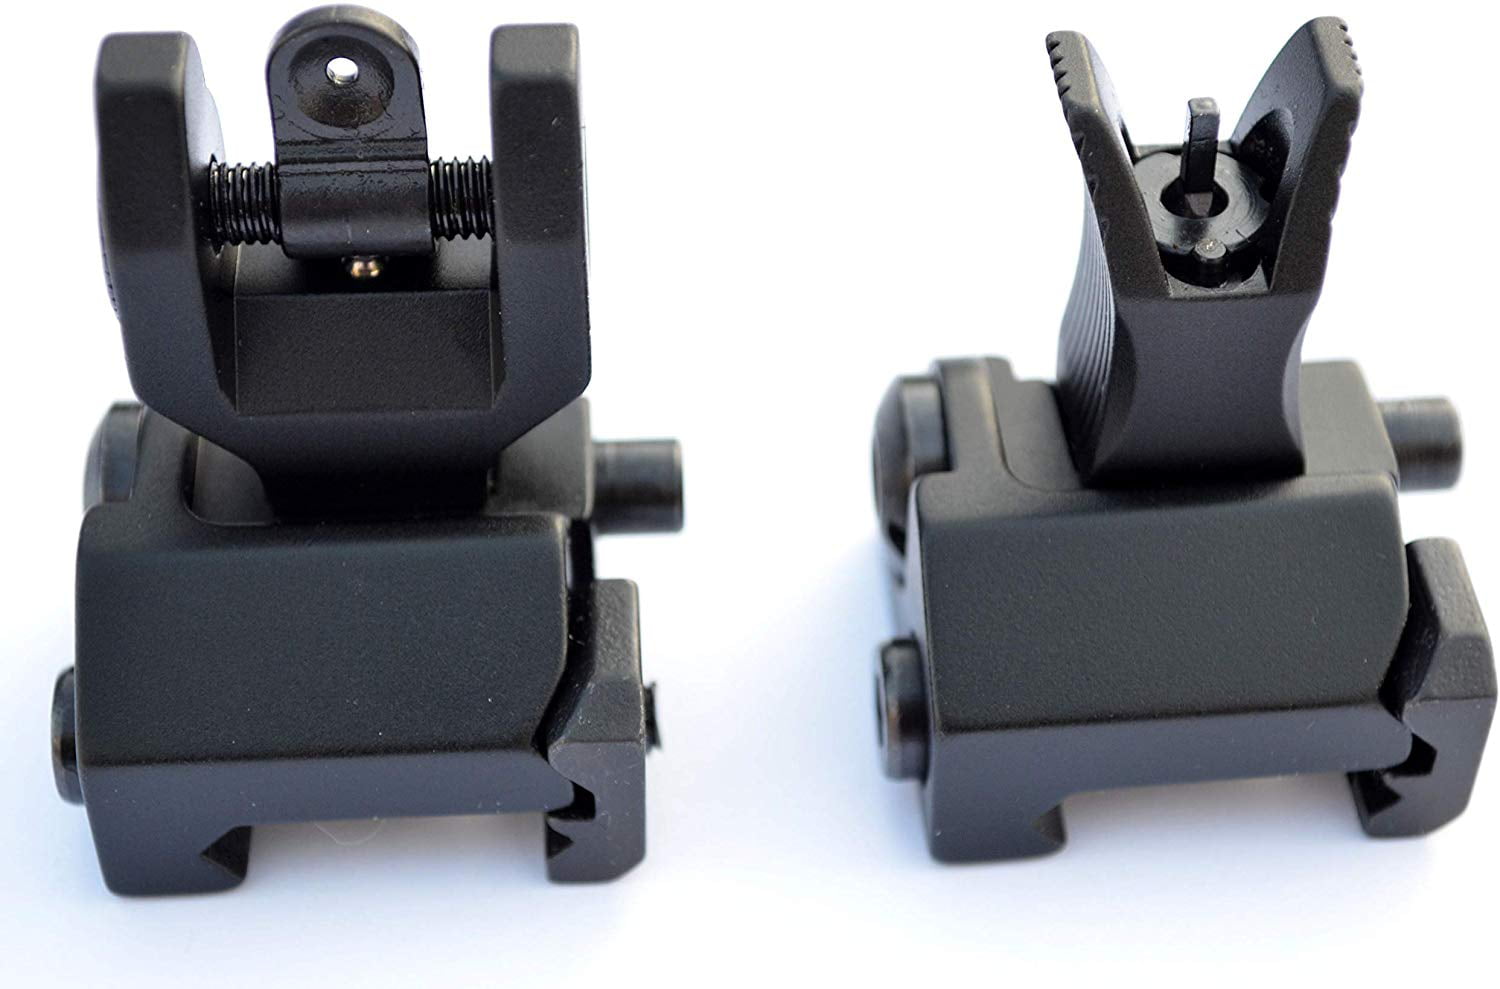 Details about   Gun Rifle Pop-Up Sight Iron Back Up Rear Front Picatinny Rail Shooting Flip-Up 